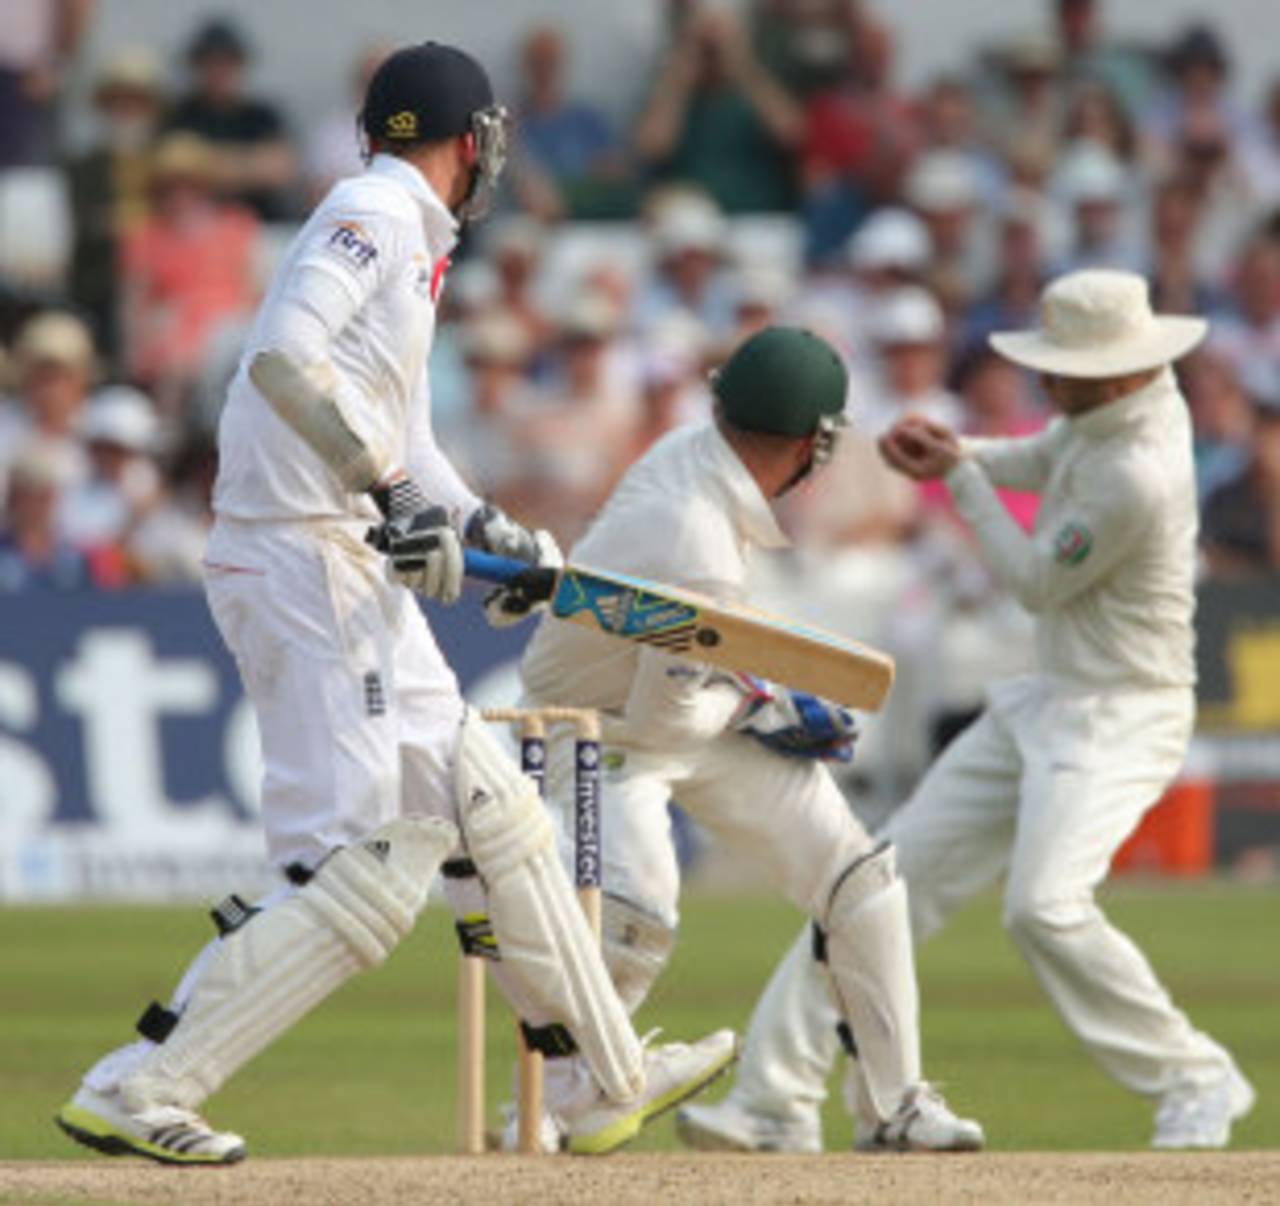 Stuart Broad edged to slip but was given not out, and Australia had no reviews left&nbsp;&nbsp;&bull;&nbsp;&nbsp;PA Photos